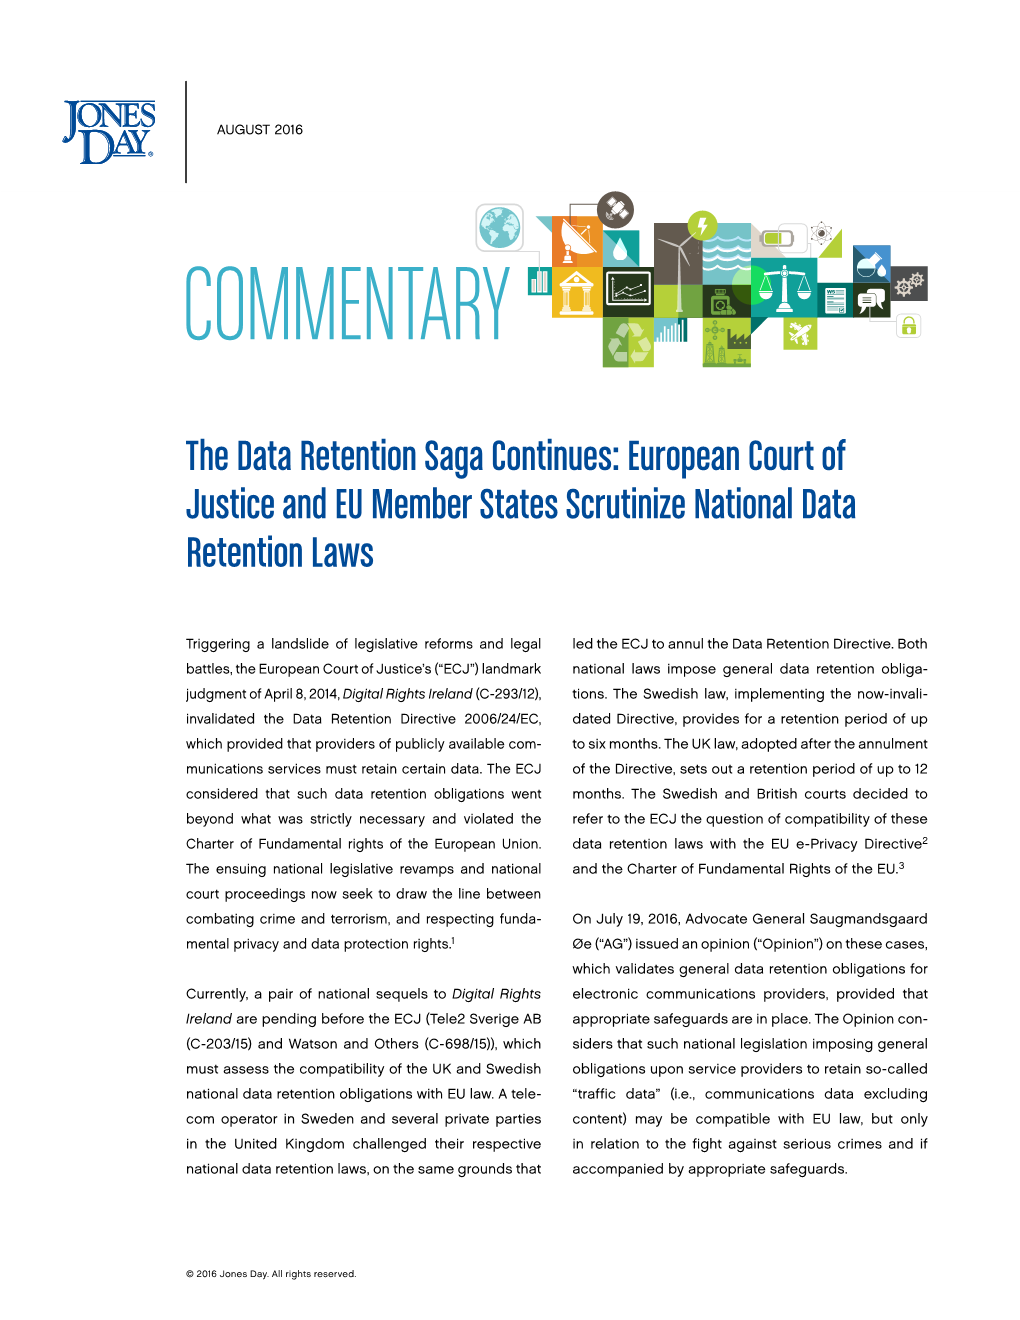 The Data Retention Saga Continues: European Court of Justice and EU Member States Scrutinize National Data Retention Laws